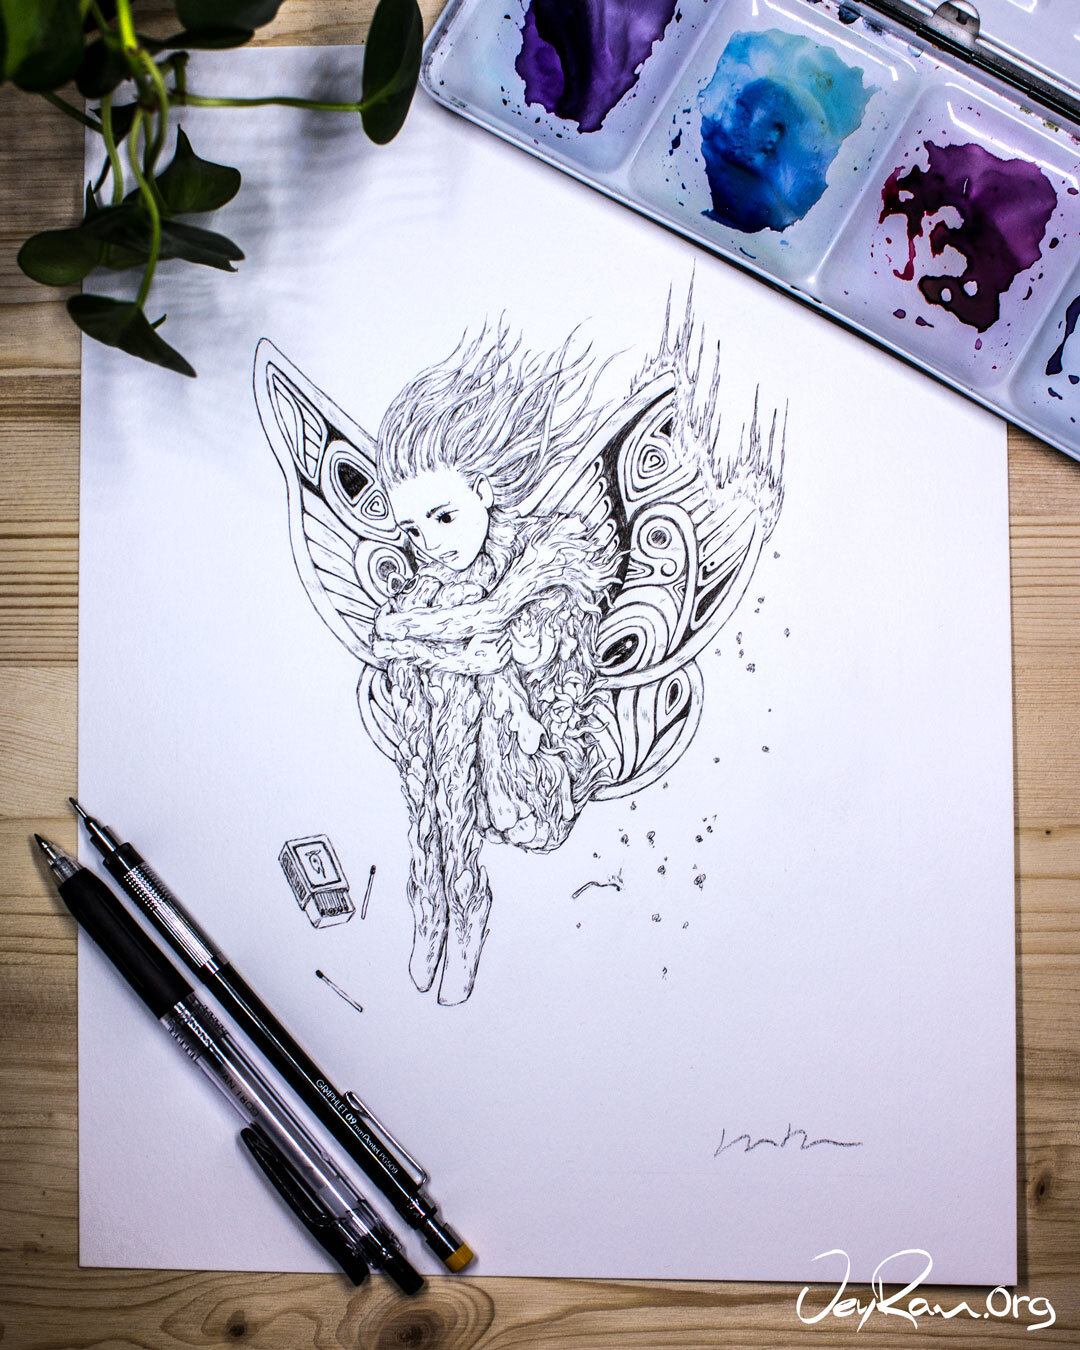 https://images.squarespace-cdn.com/content/v1/537cf3d6e4b0ea6234259f4b/1572994712728-IDFAG8UAQ5G8VC137BRV/Fairy+Ink+Drawing%3A+Ballpoint+Pen+Art+by+JeyRam.+I%27m+an+artist+from+Toronto+that+specializes+in+nature-inspired+ink+drawings%21+%23inktober+%23inkart+%23fantasy+%23fairies+%23fairy